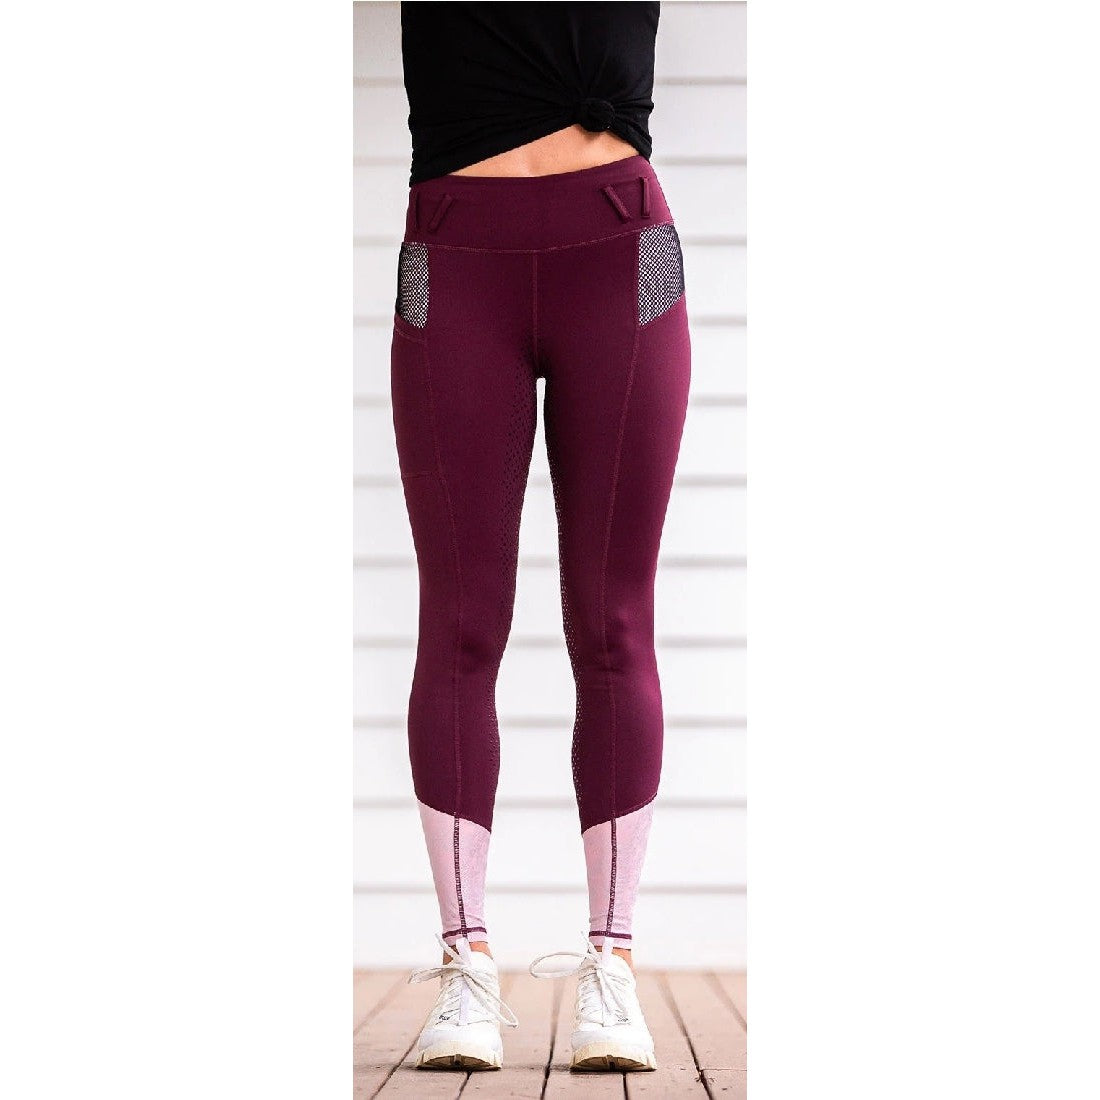 Person wearing maroon horse riding tights with mesh pockets.